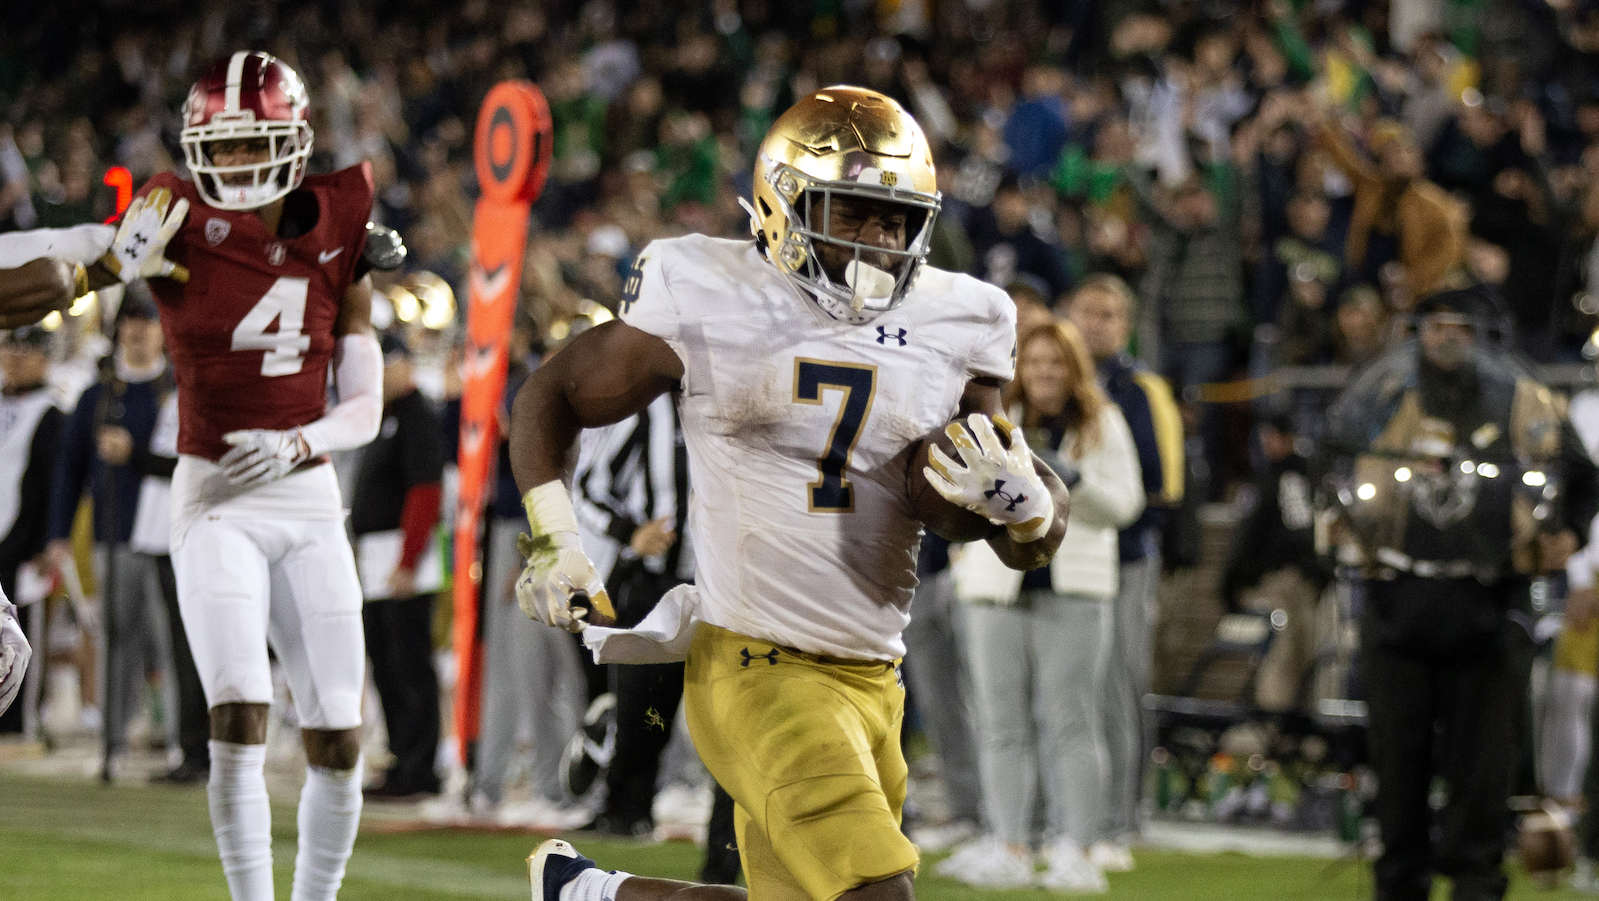 Notre Dame running back Audric Estime rushes for a touchdown against Stanford